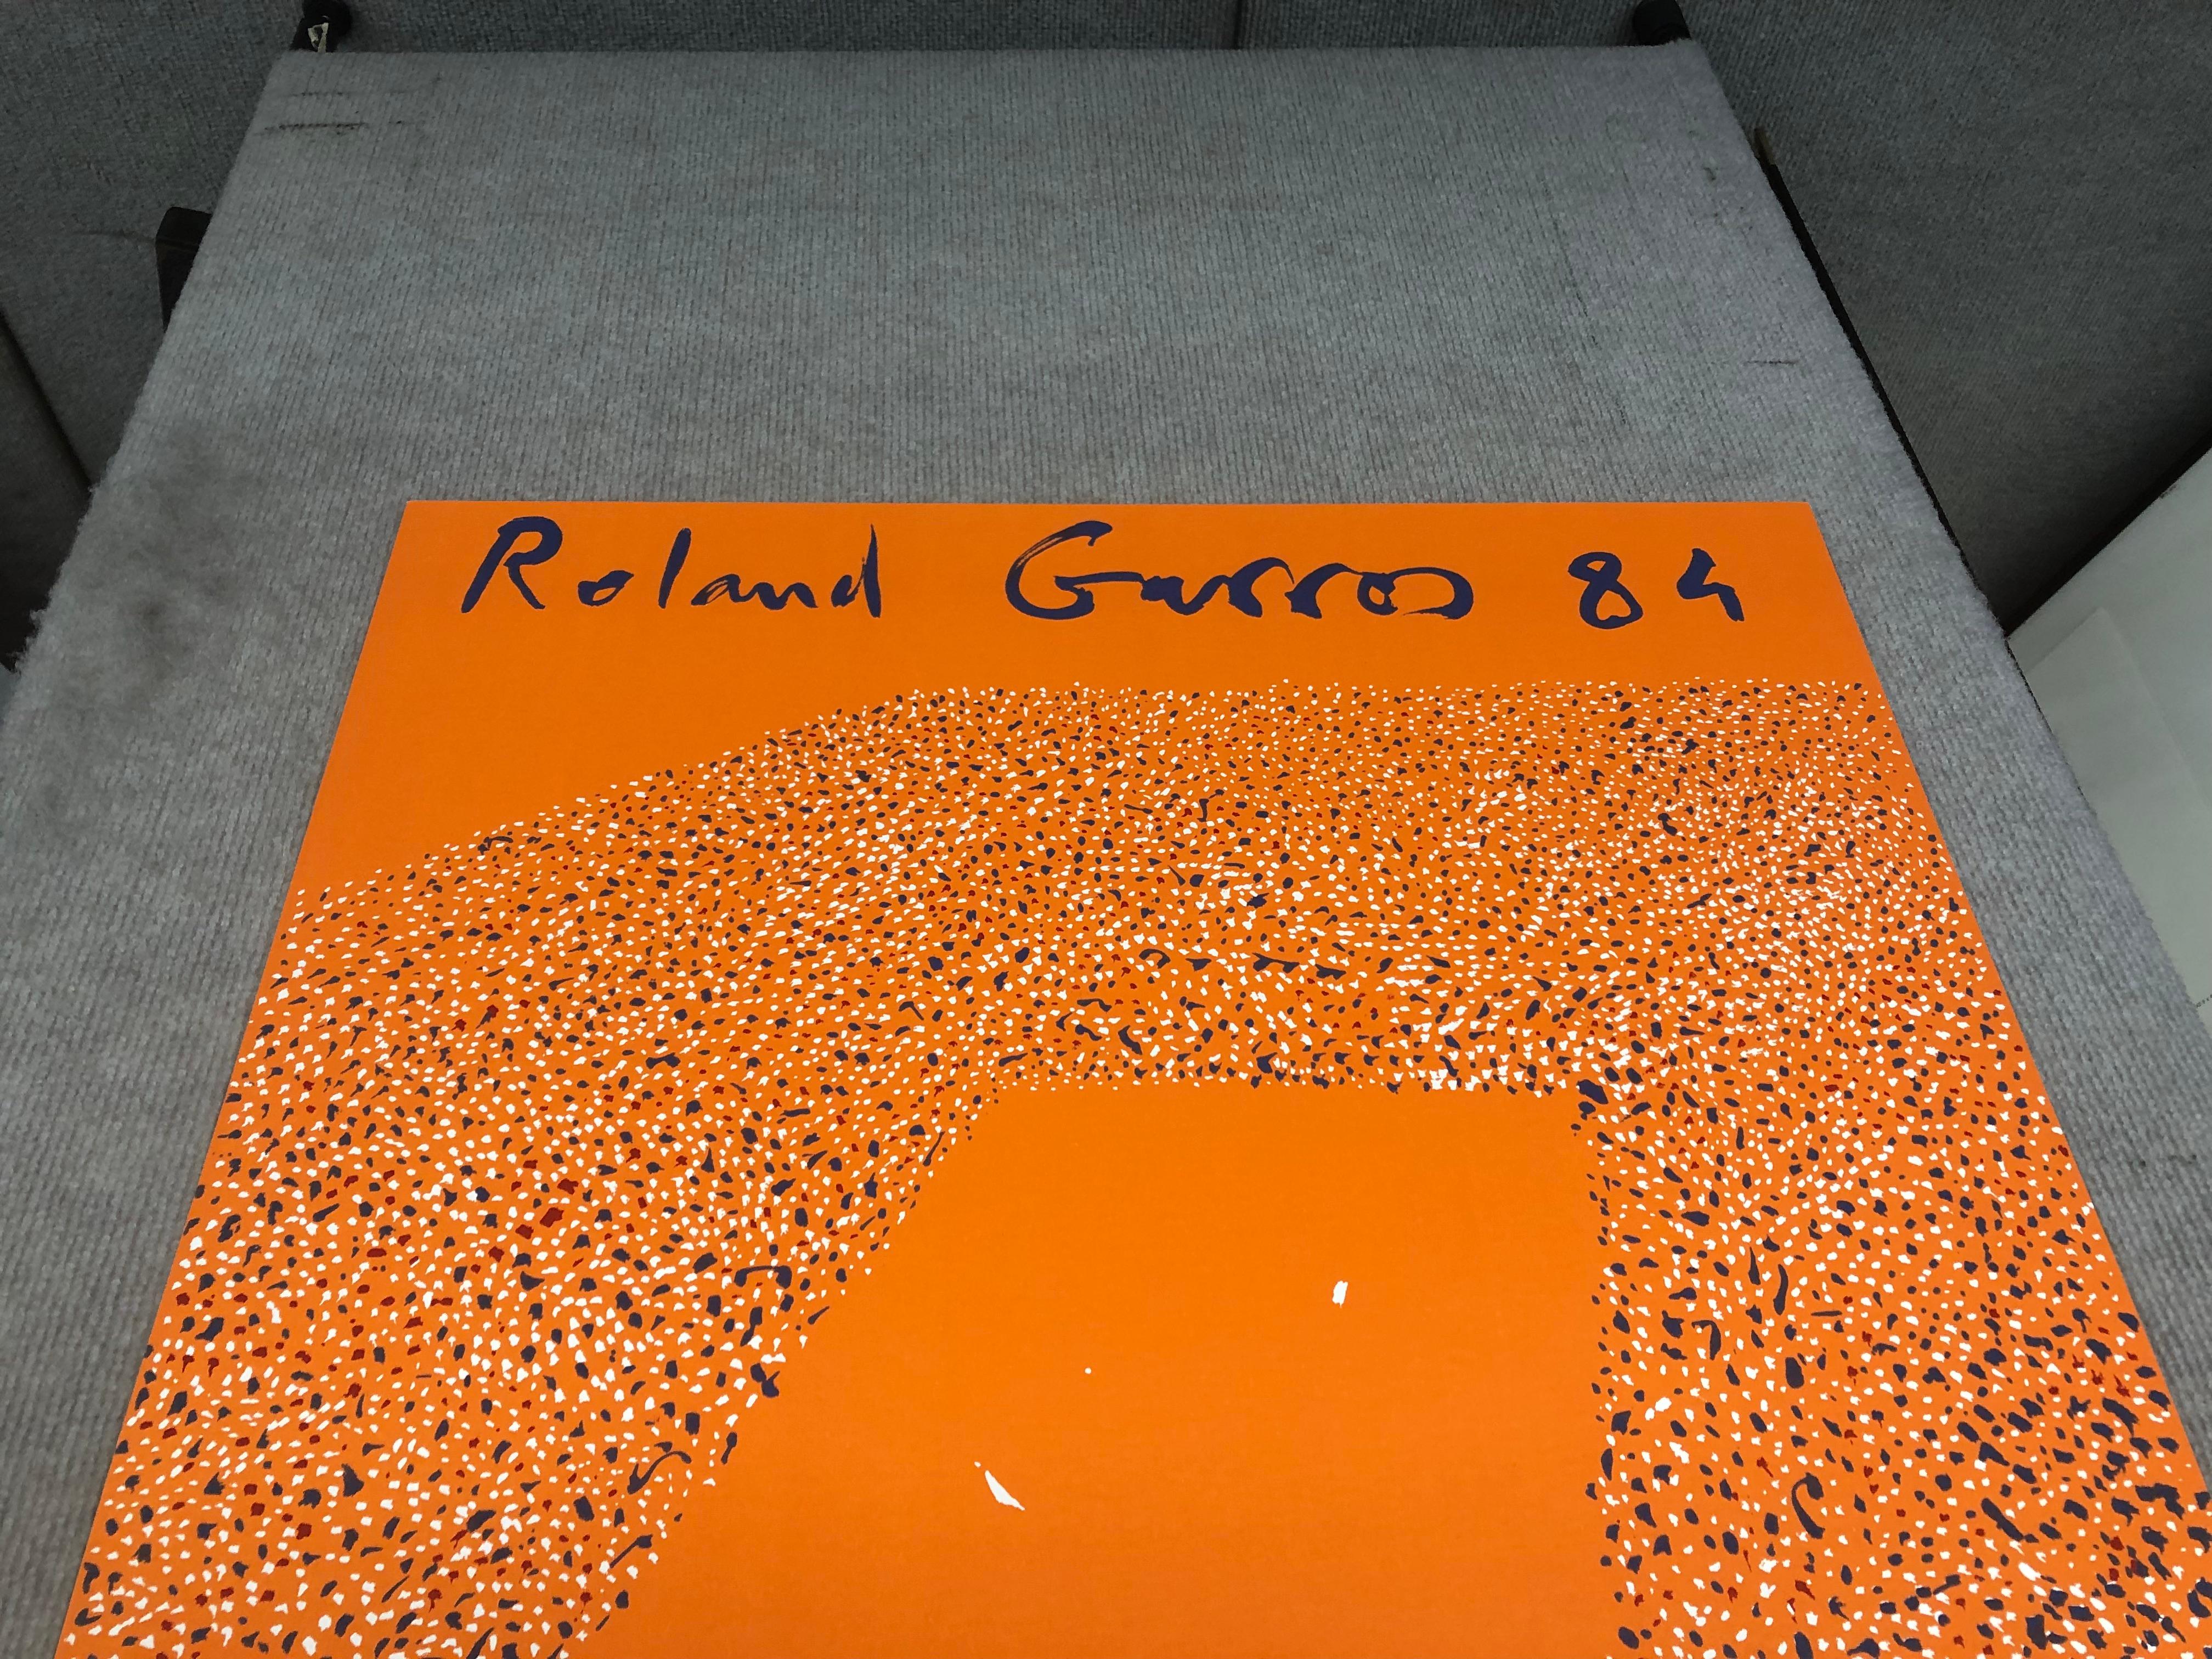 1984 Gilles Aillaud 'Roland Garros French Open' Pop Art Orange France Lithograph 1